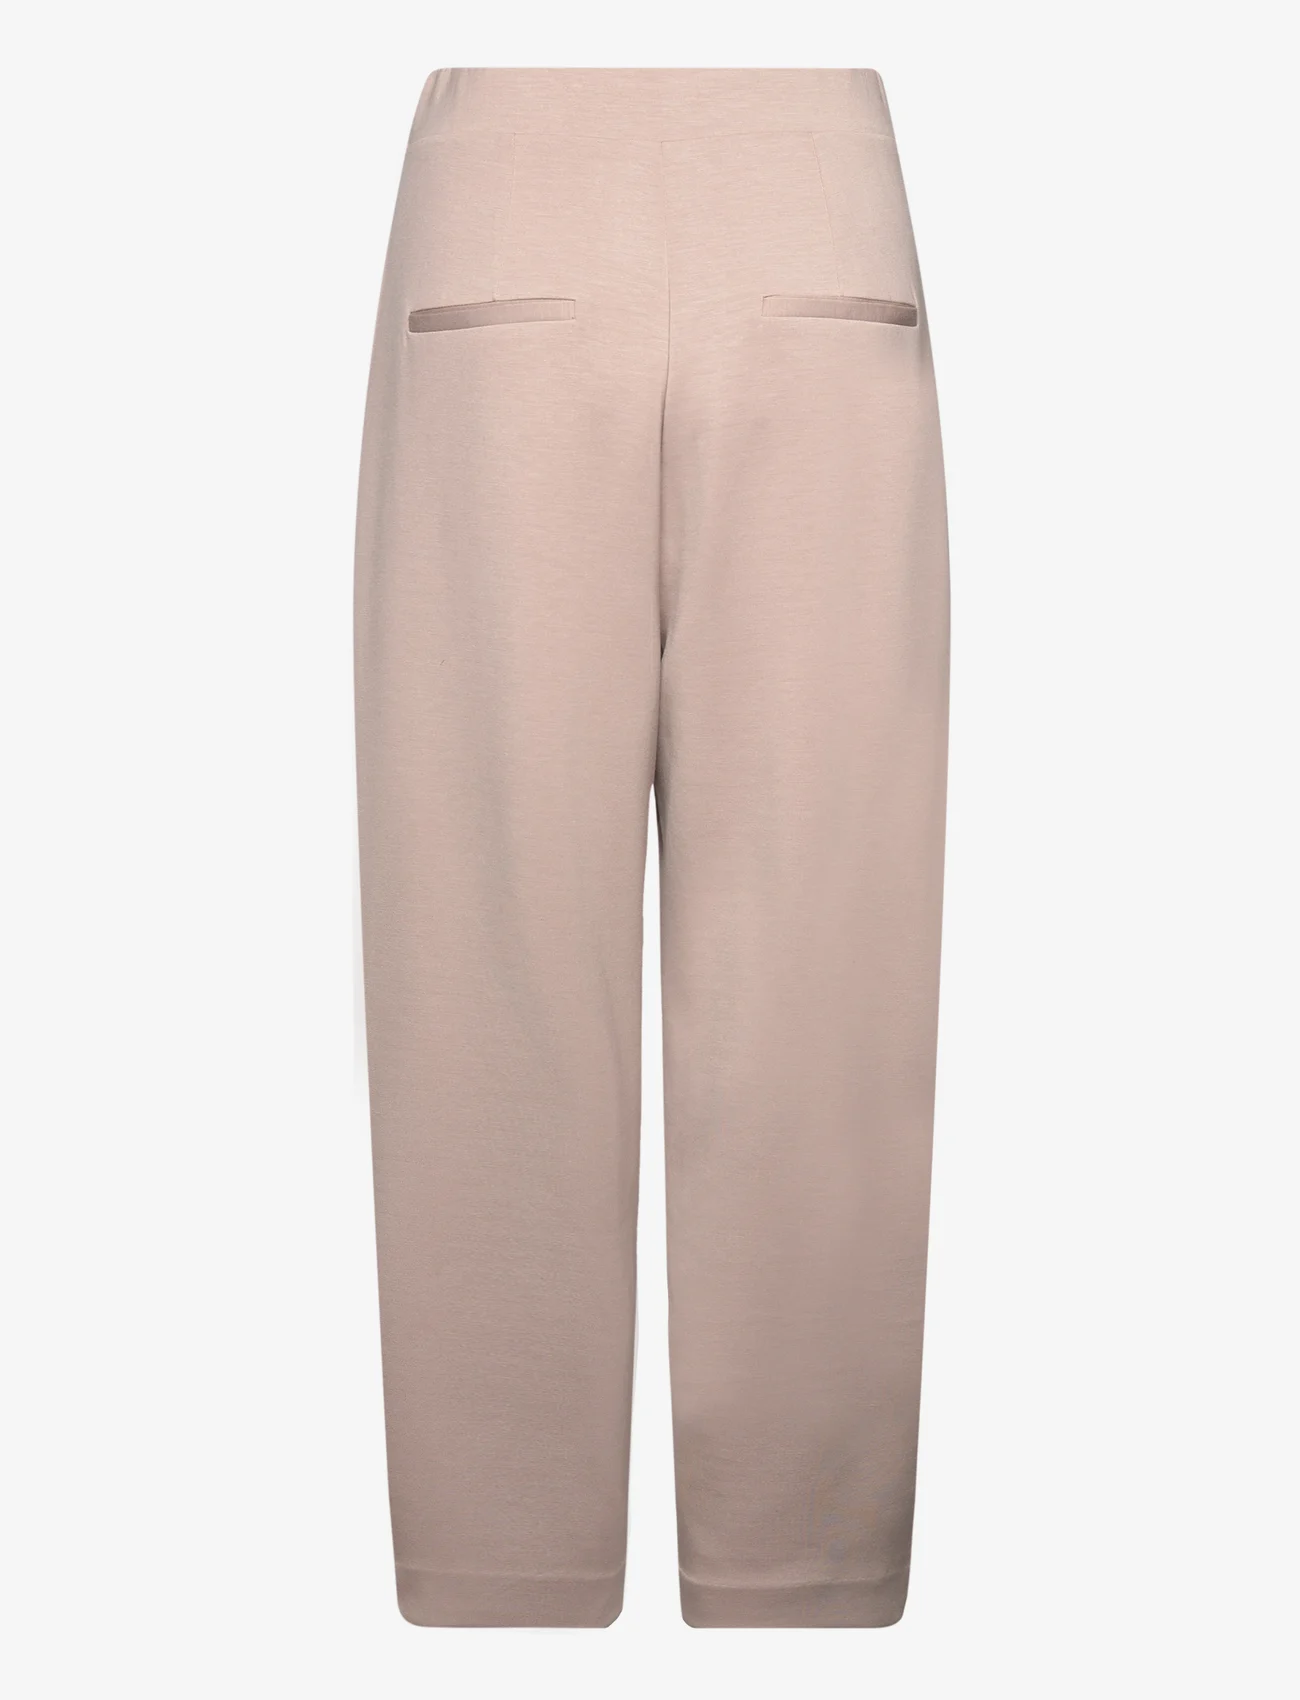 InWear - PannieIW Pant - party wear at outlet prices - clay - 1